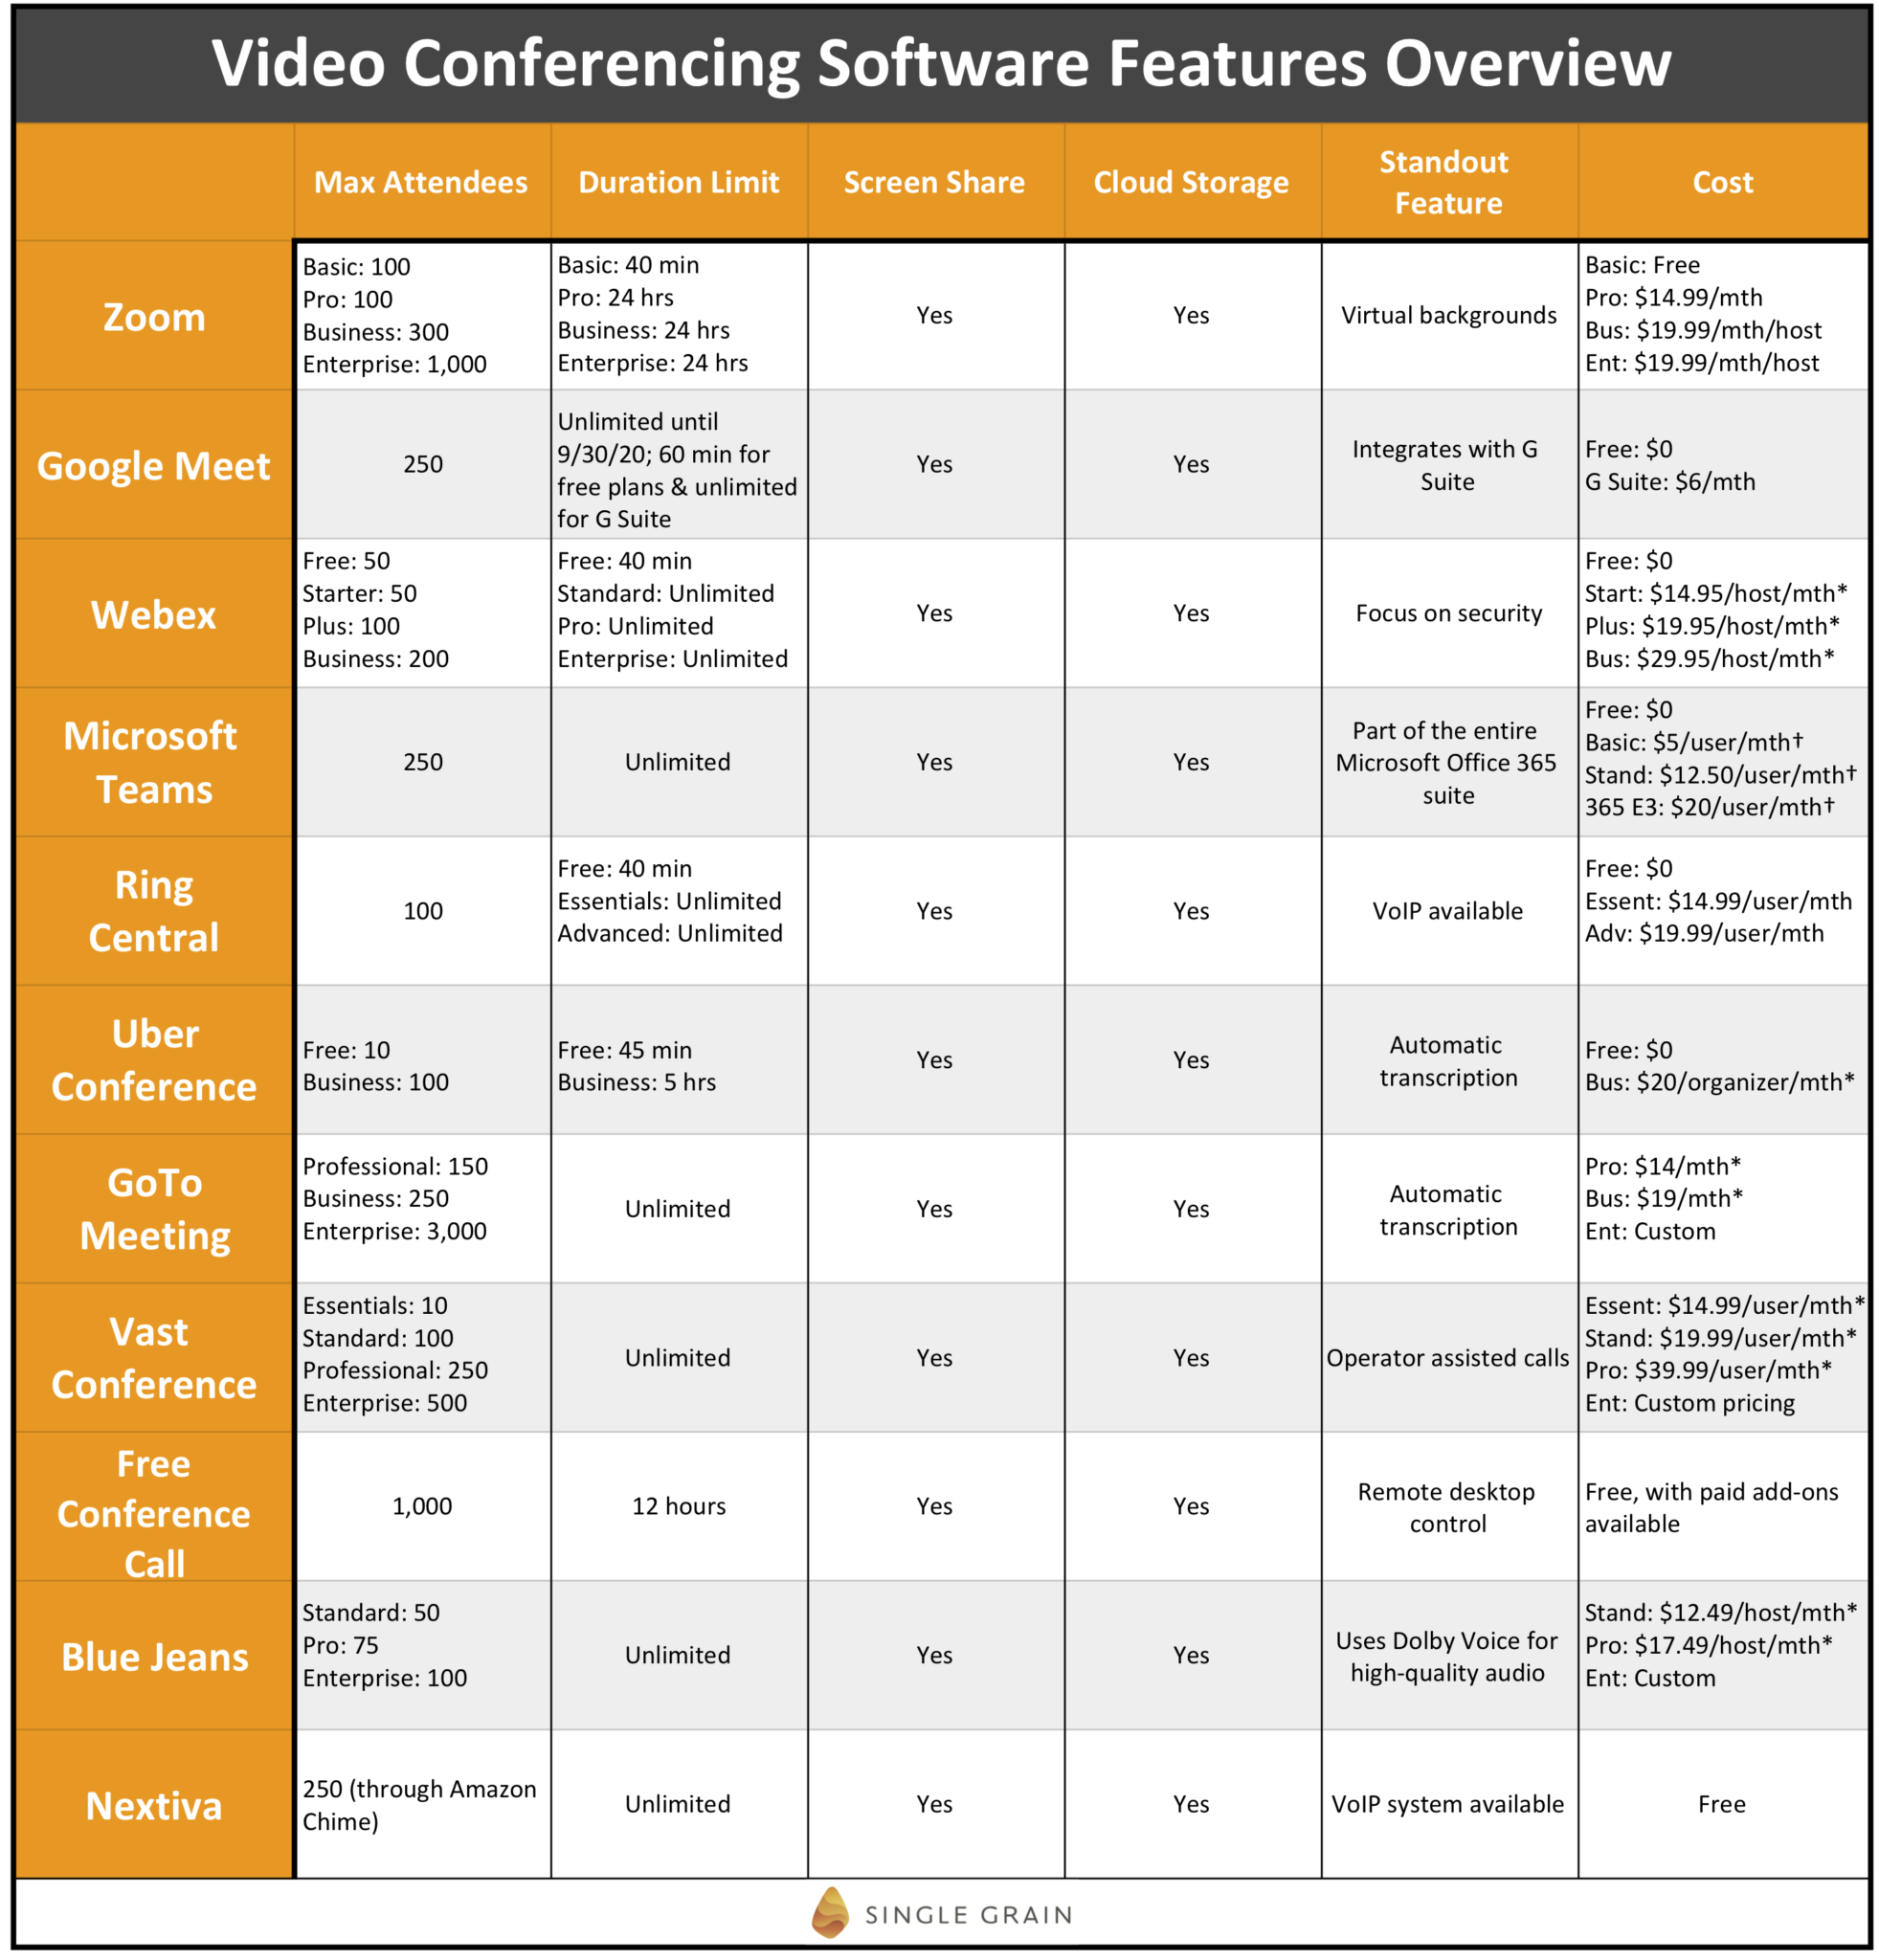 Video Conferencing Software Features Overview